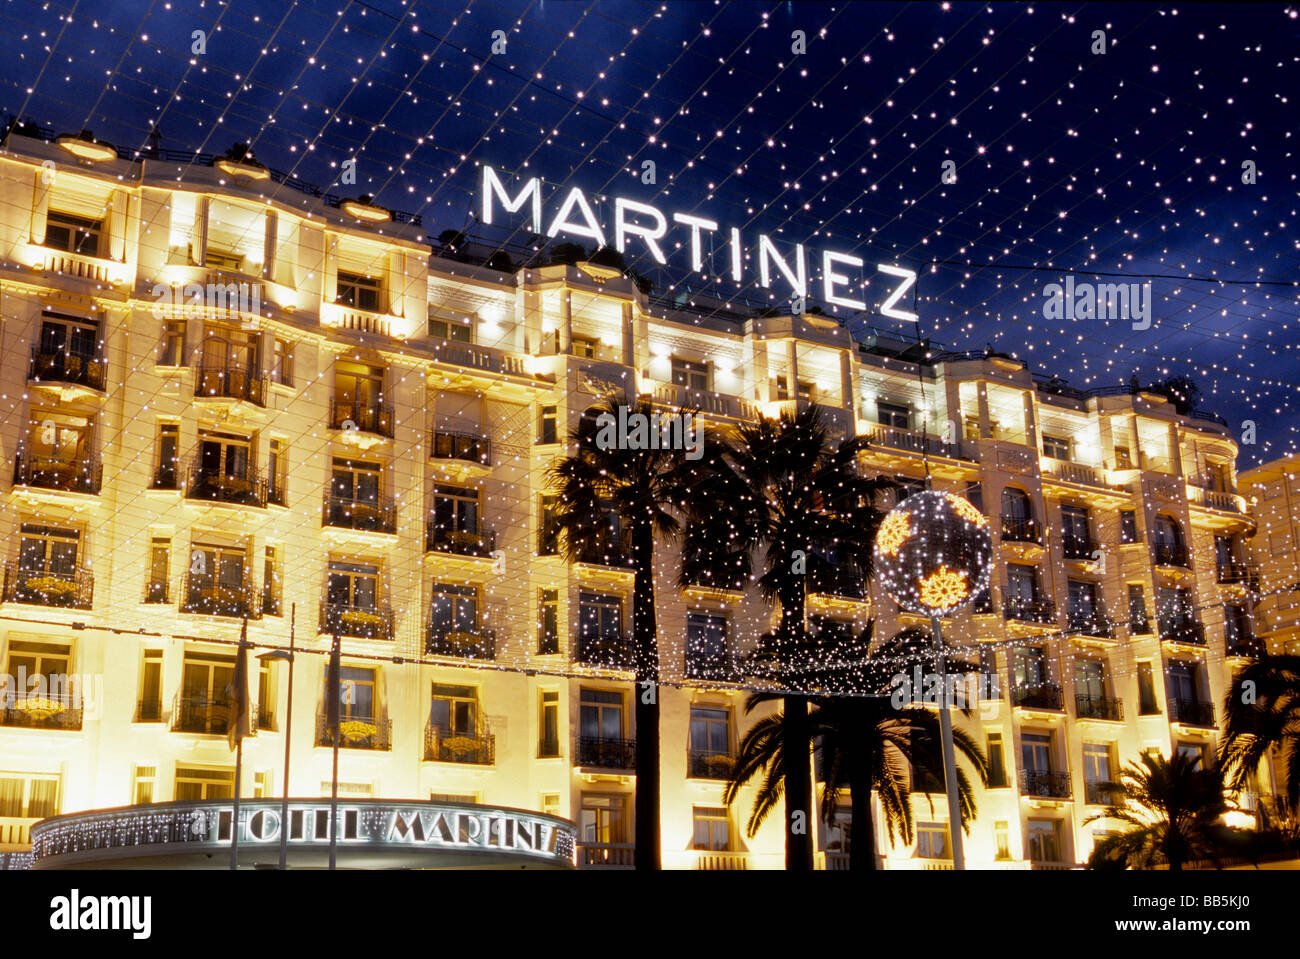 The Martinez hotel in Cannes with Christmas decoration Stock Photo